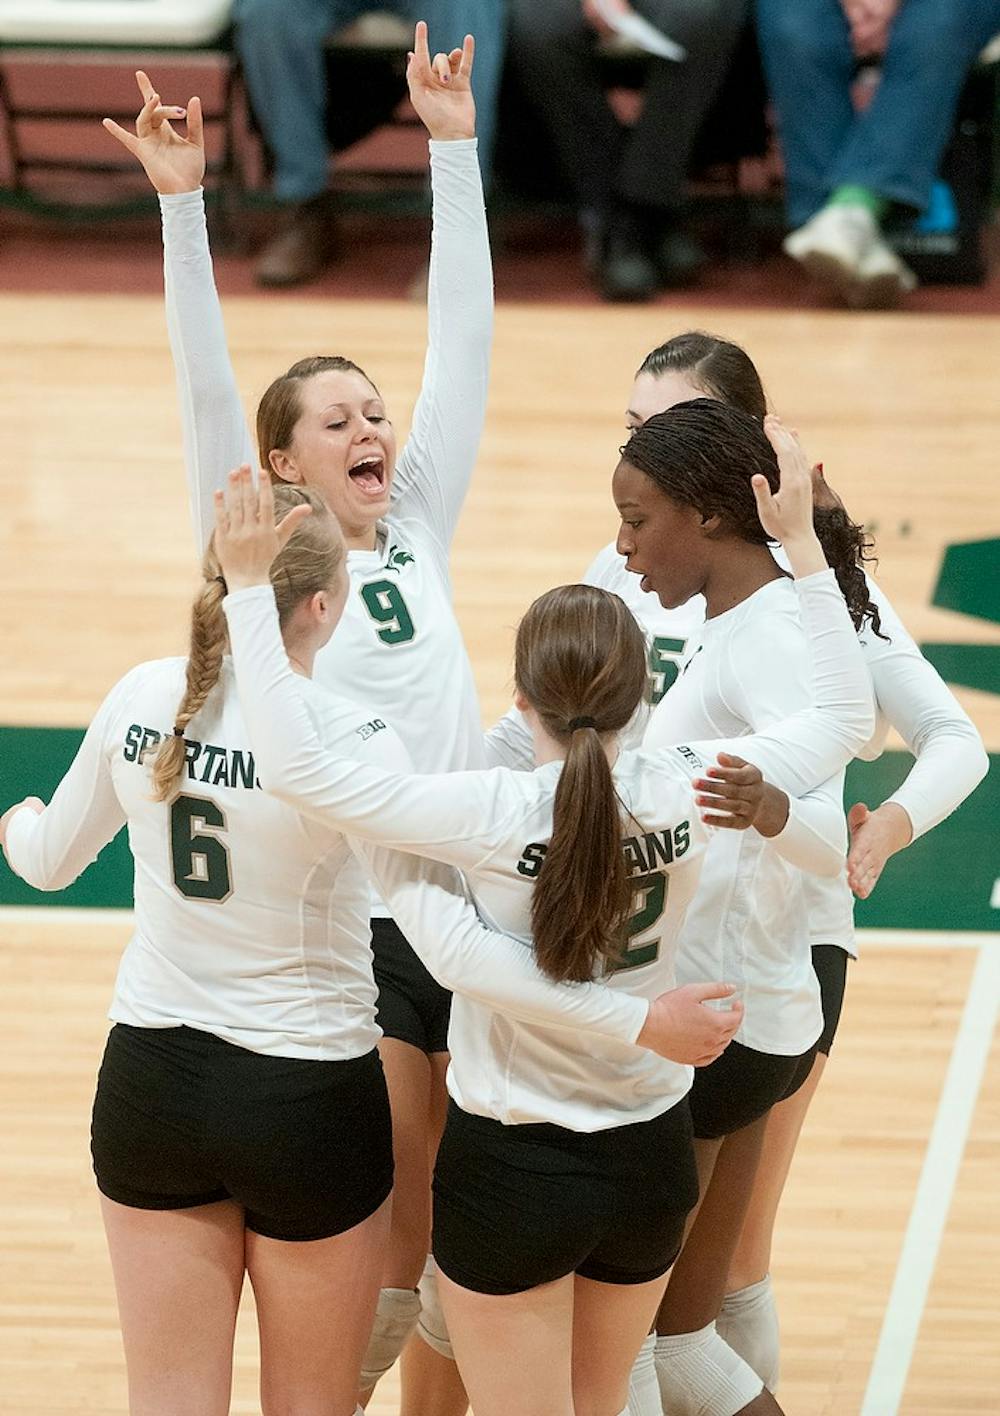 Members of the volleyball team cheer after scoring a point against Wisconsin on Nov. 10, 2012, at Jenison Field House. The Spartans beat the Badgers  by winning scores of 25-19, 25-20, and 25-20, giving the Spartans a fourth consecutive win against conference opponents for the first time since 2003. Natalie Kolb/The State News